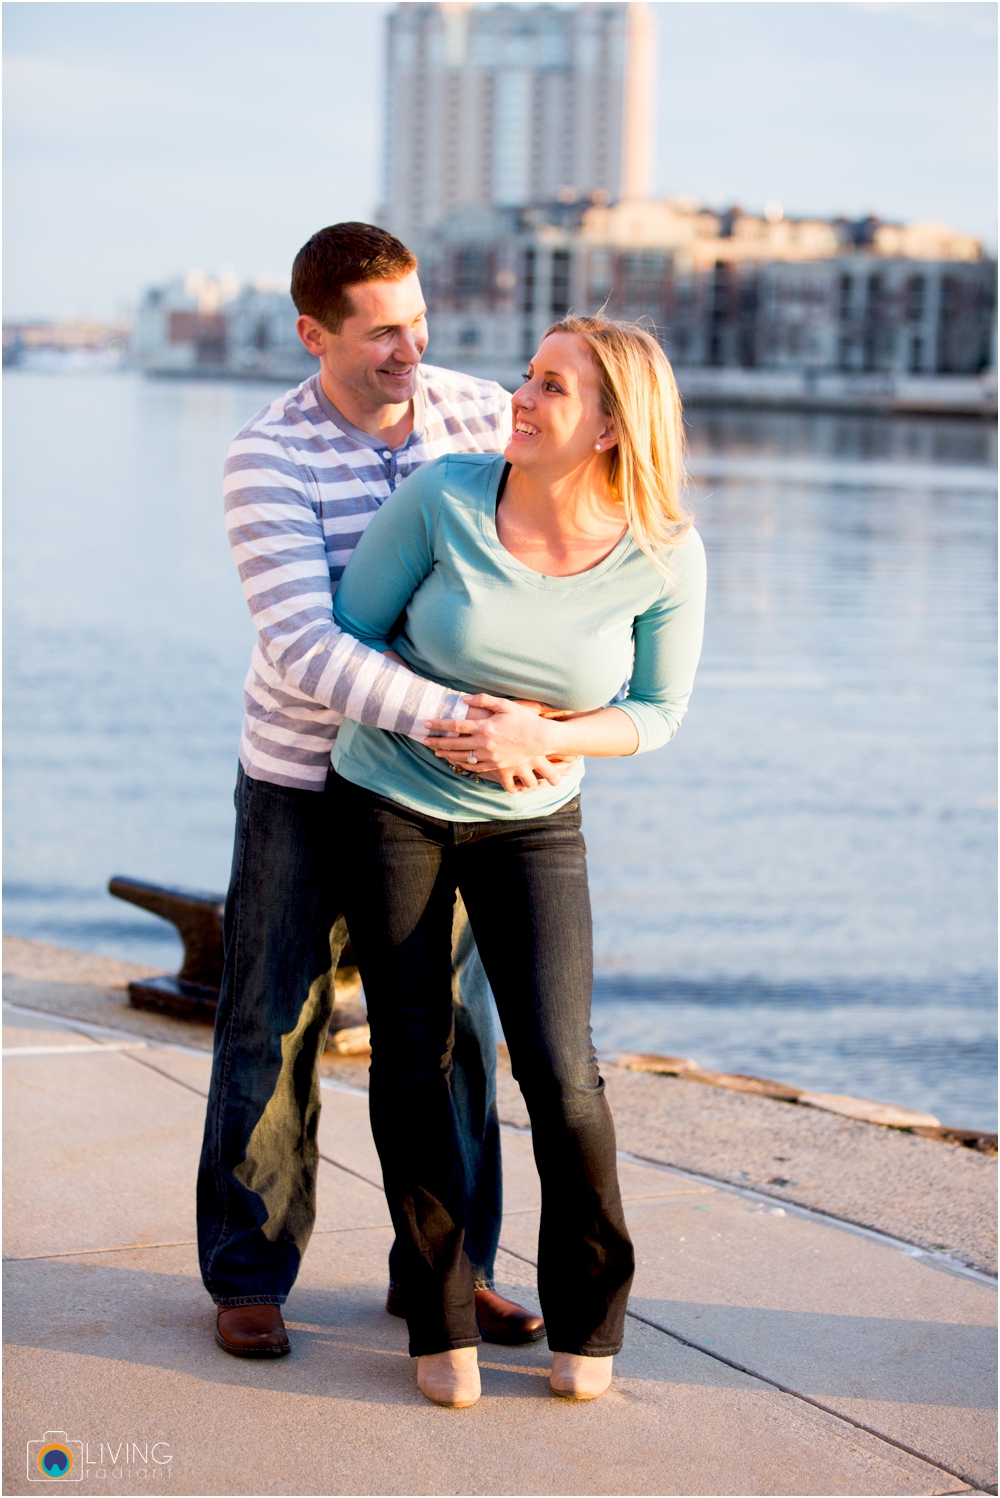 grand-historic-venue-downtown-inner-harbor-baltimore-pier-five-5-engagement-session-indoor-outdoor-living-radiant-photography-weddings-engagements_0041.jpg